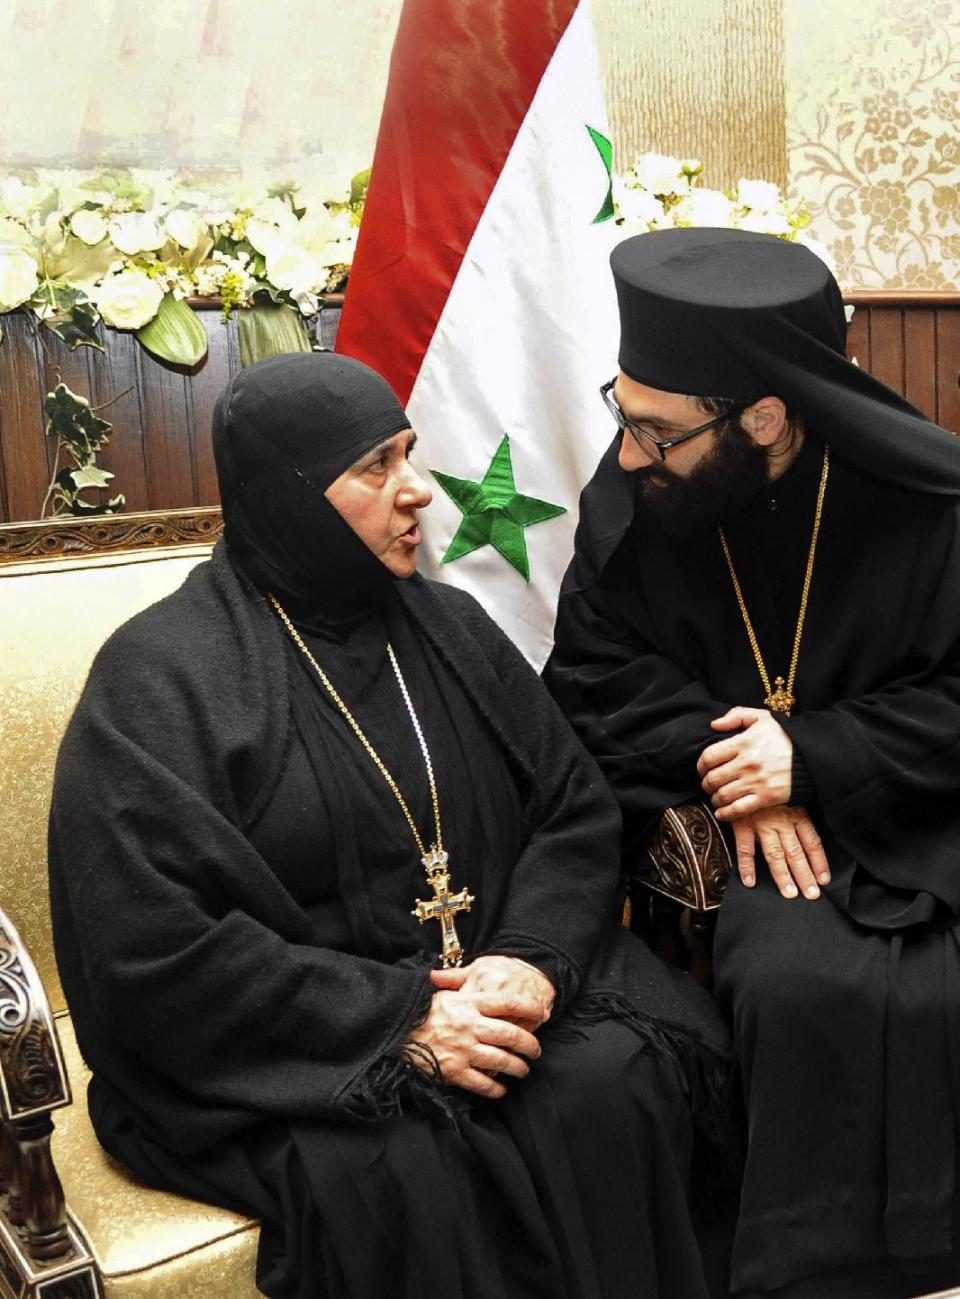 In this photo released by the Syrian official news agency SANA, a nun who was freed after being held by Syrian rebels, is greeted by a church official at the Syrian border town of Jdeidat Yabous, early Monday, March. 10, 2014. Rebels in Syria freed more than a dozen Greek Orthodox nuns on Monday, ending their three-month captivity in exchange for Syrian authorities releasing dozens of female prisoners. The release of the nuns and their helpers, 16 women in all, is a rare successful prisoner-exchange deal between Syrian government authorities and the rebels seeking to overthrow the rule of President Bashar Assad. (AP Photo/SANA)